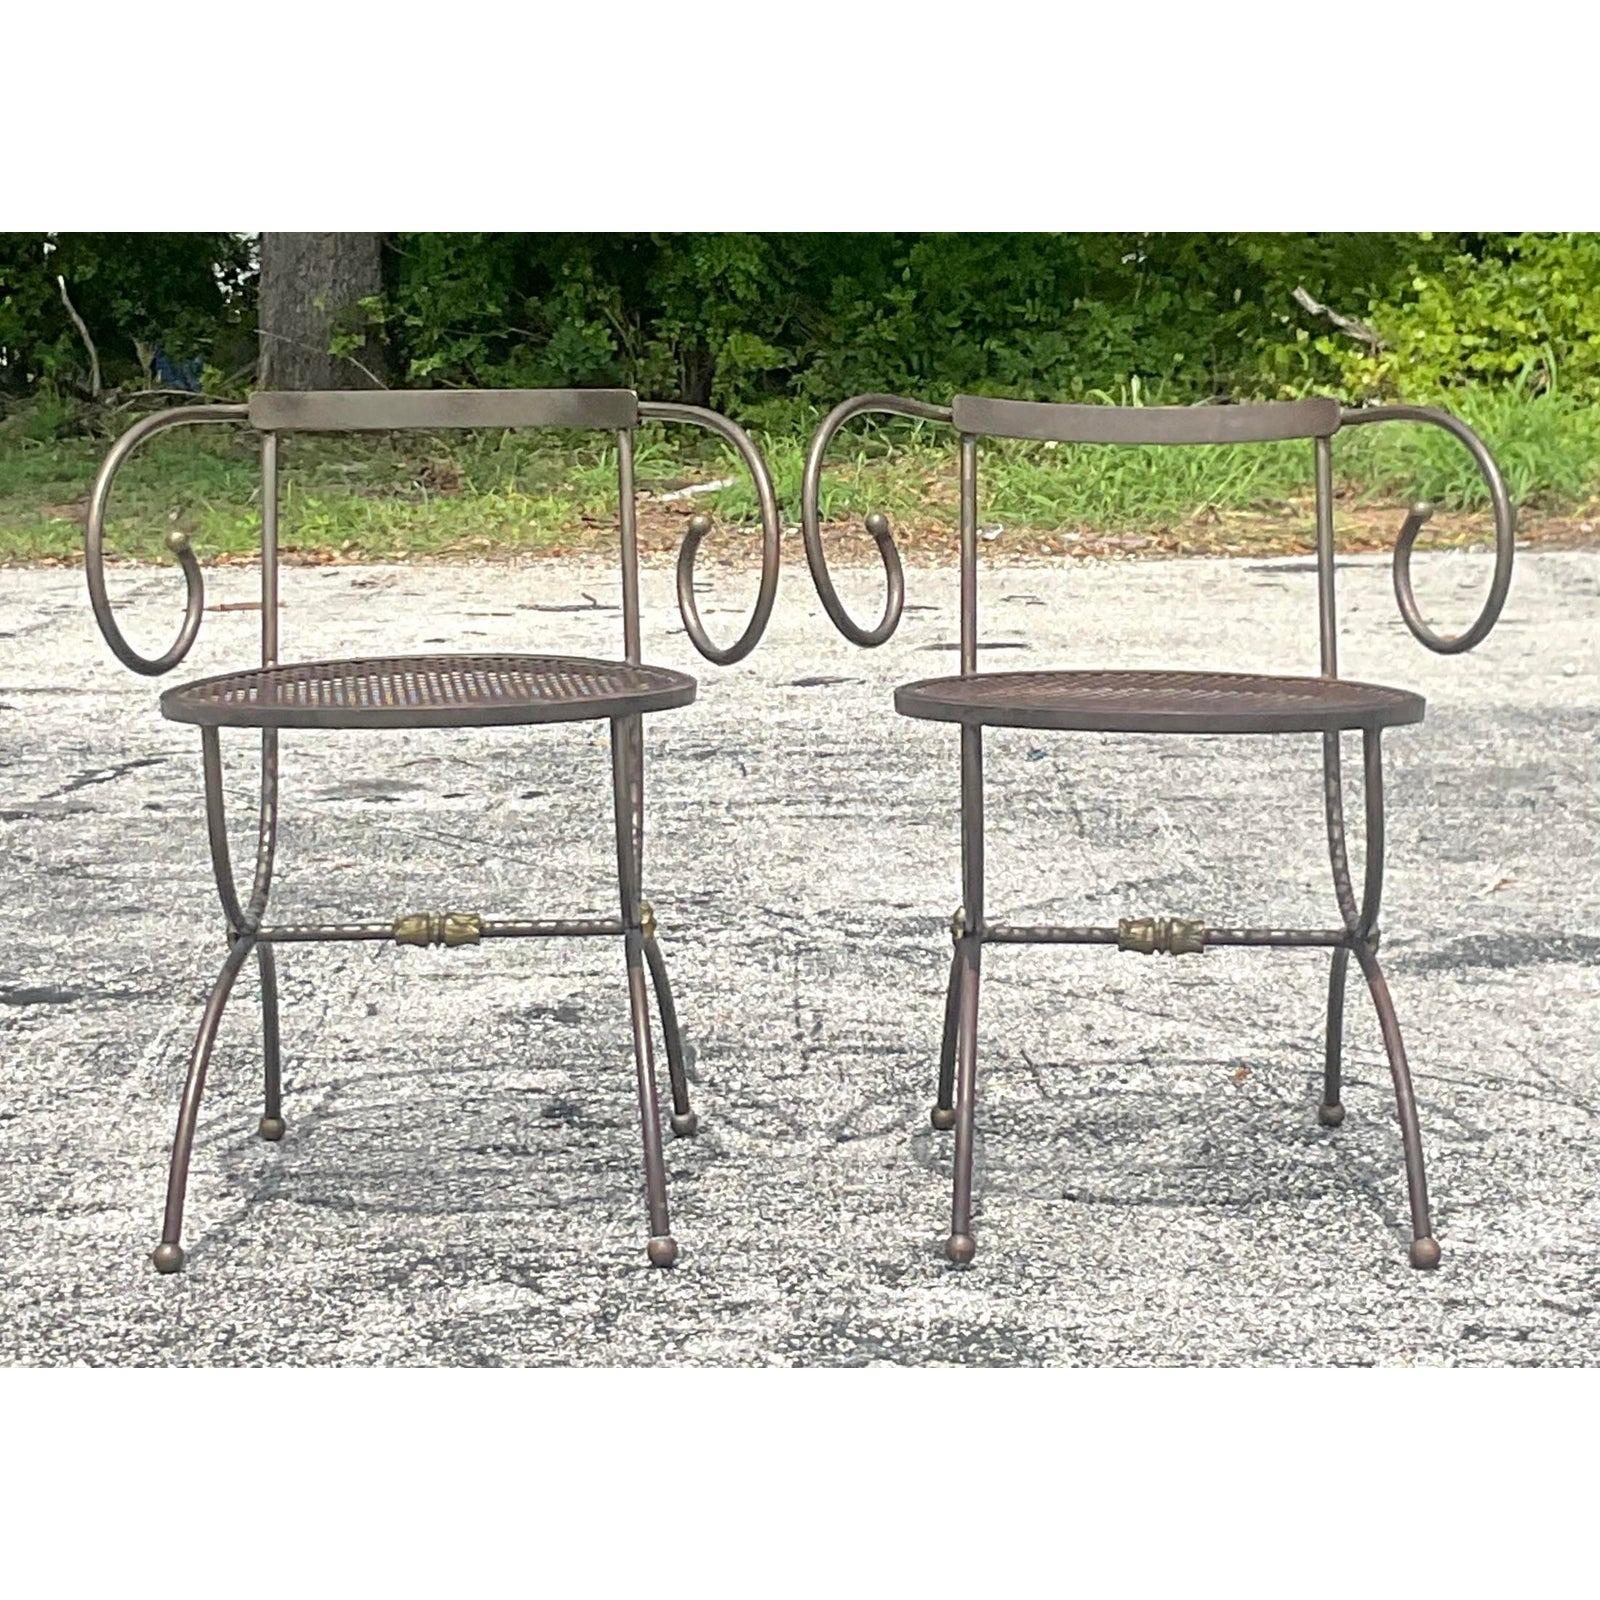 20th Century Vintage Boho Swirl Wrought Iron Accent Chairs - a Pair For Sale